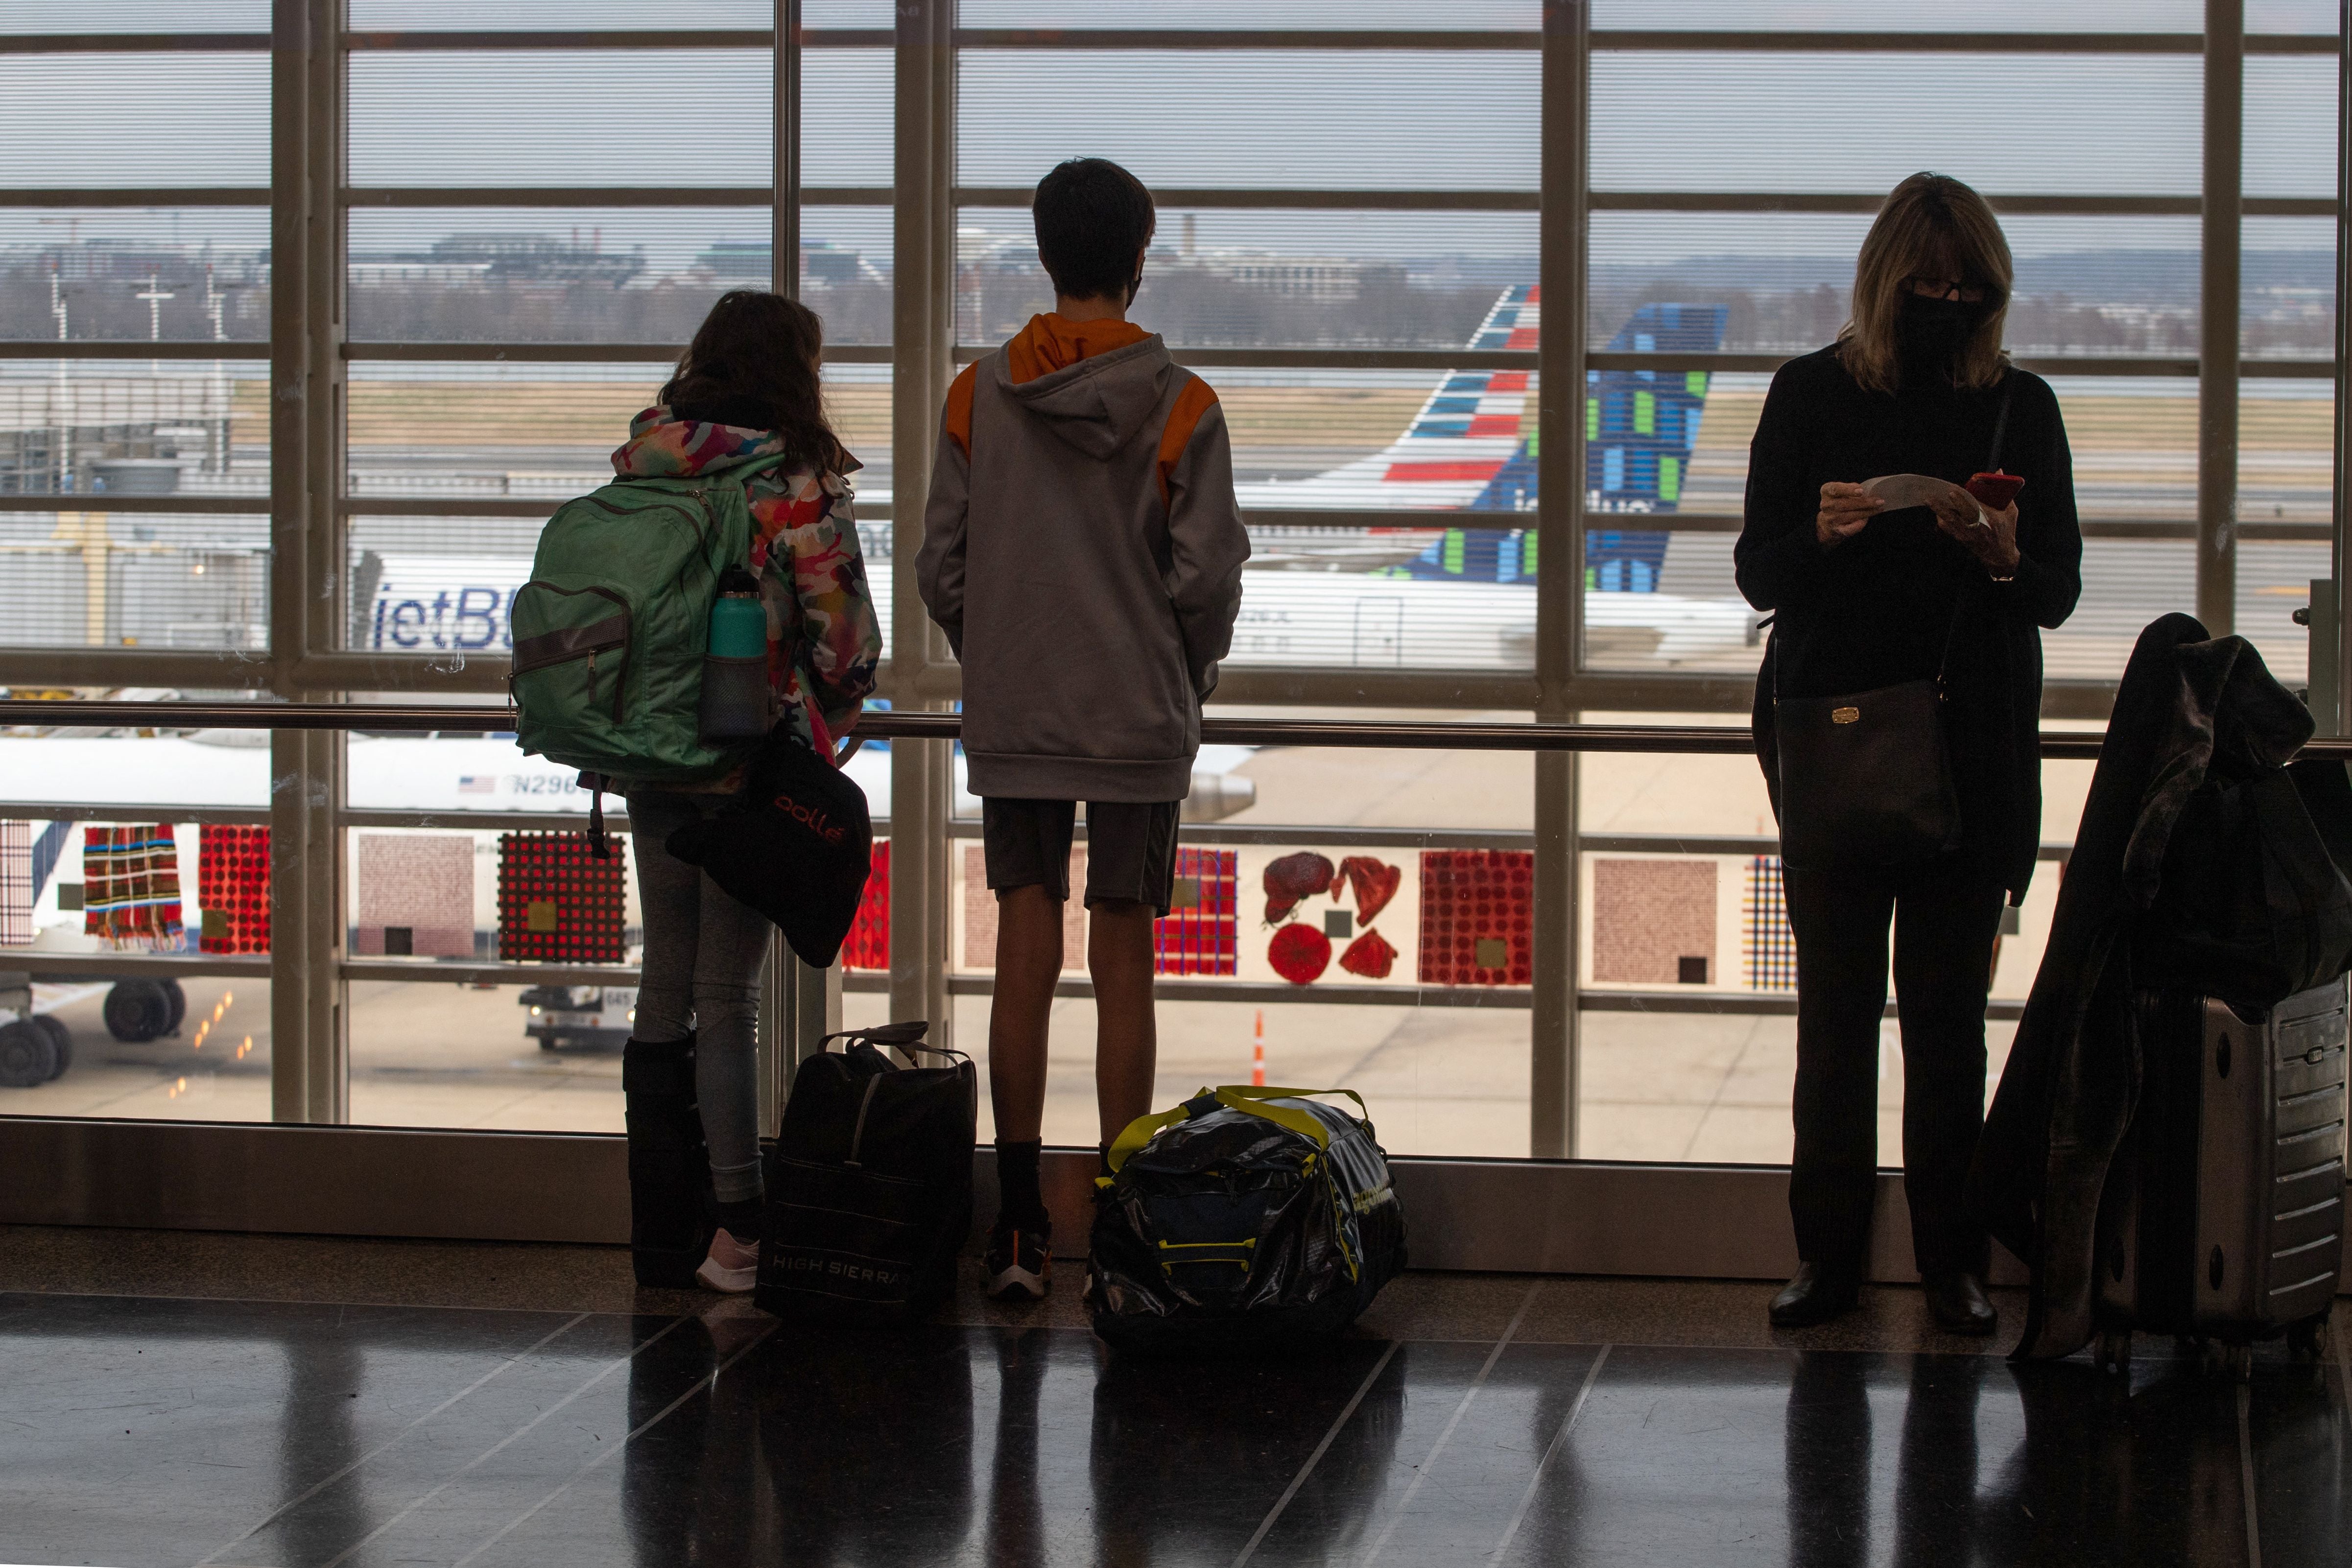 File: Travelers watch planes on the tarmac near checking in counters at Ronald Reagan International Airport in Washington, DC on 27 December 2021